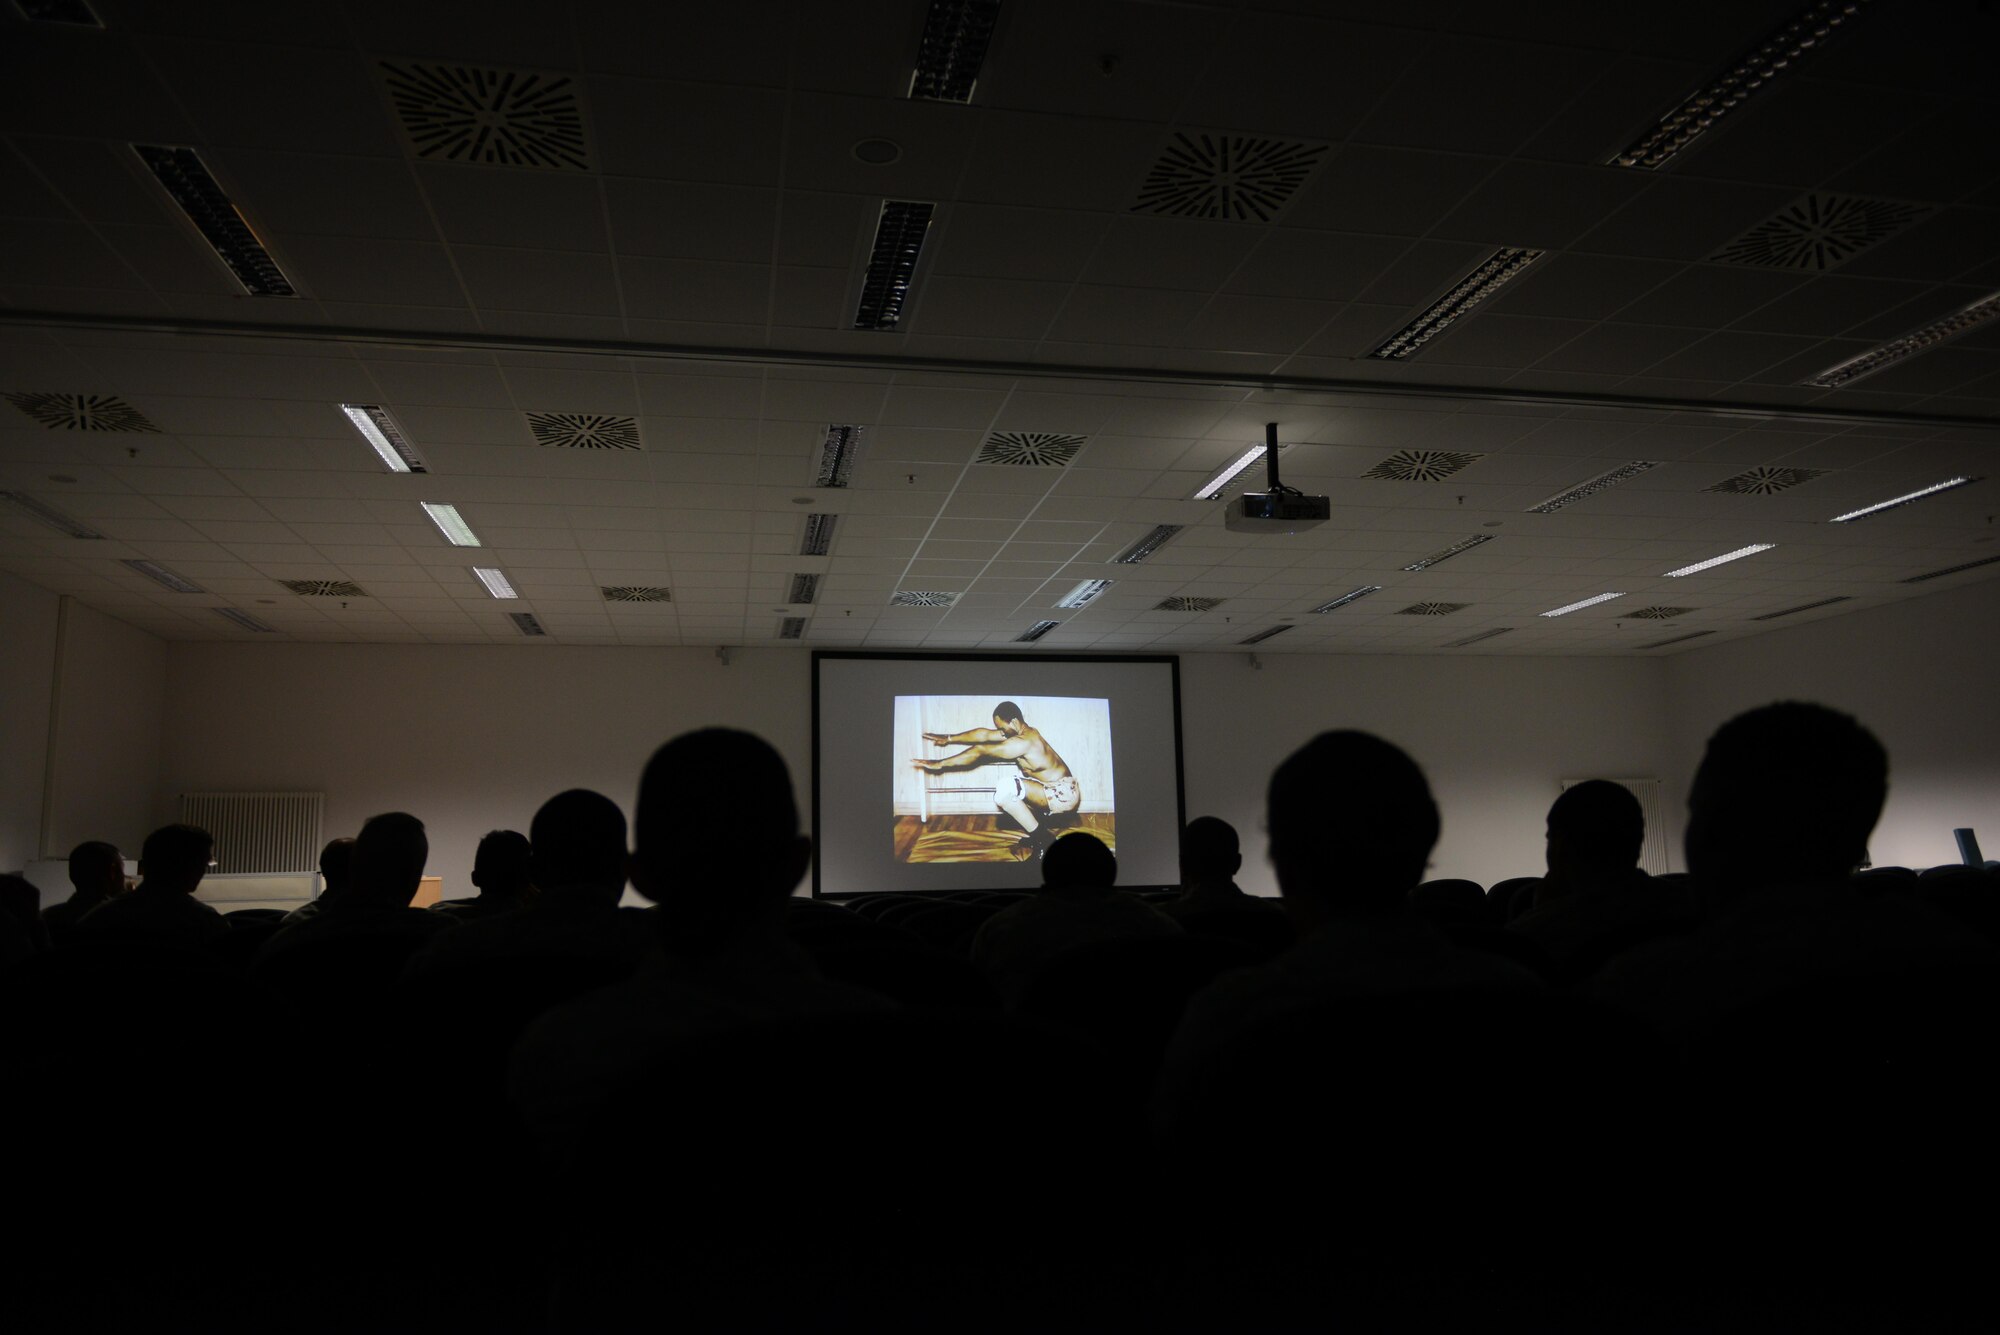 Ramstein Airmen watch a video during an educational dialogue called a lunch and learn for National Disability Employment Awareness Month at Ramstein Air Base, Germany, Oct. 7, 2016. NDEAM aims to highlight the need to advocate for people with disabilities looking for employment. (U.S. Air Force photo by Airman 1st Class Joshua Magbanua)